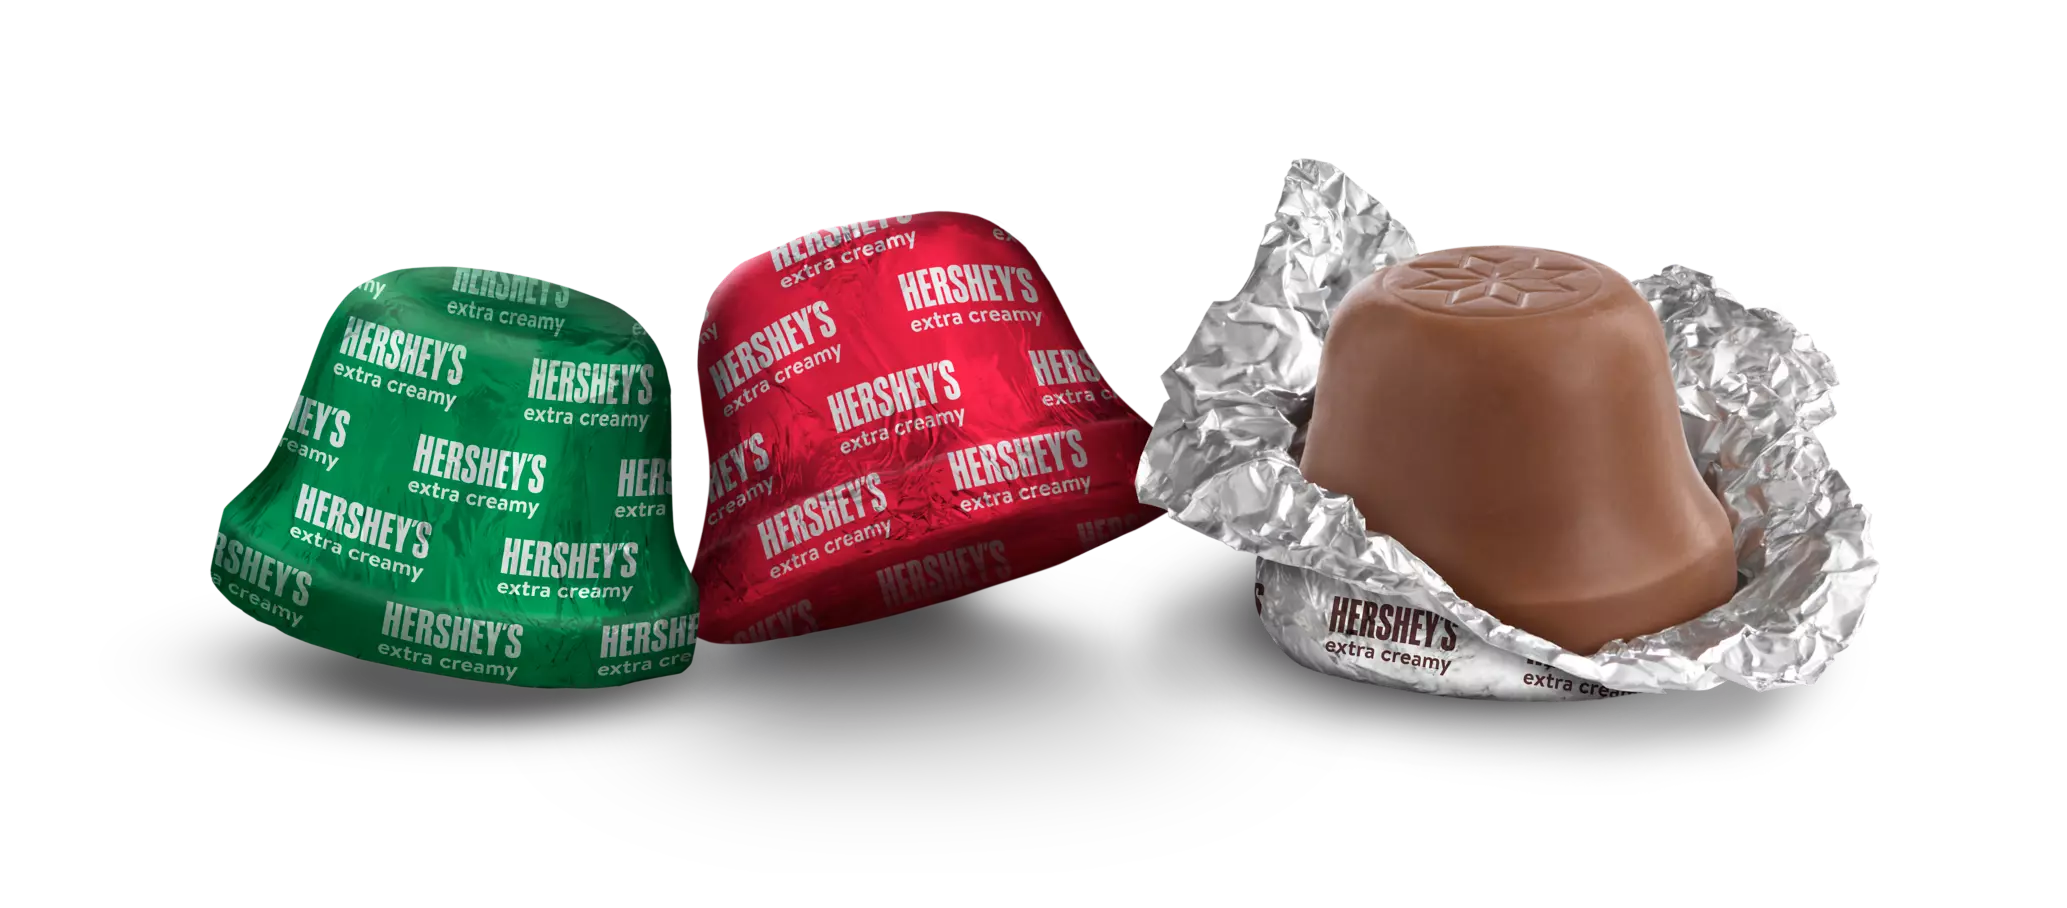 HERSHEY'S Holiday Milk Chocolate Bells, 9 oz bag - Out of Package